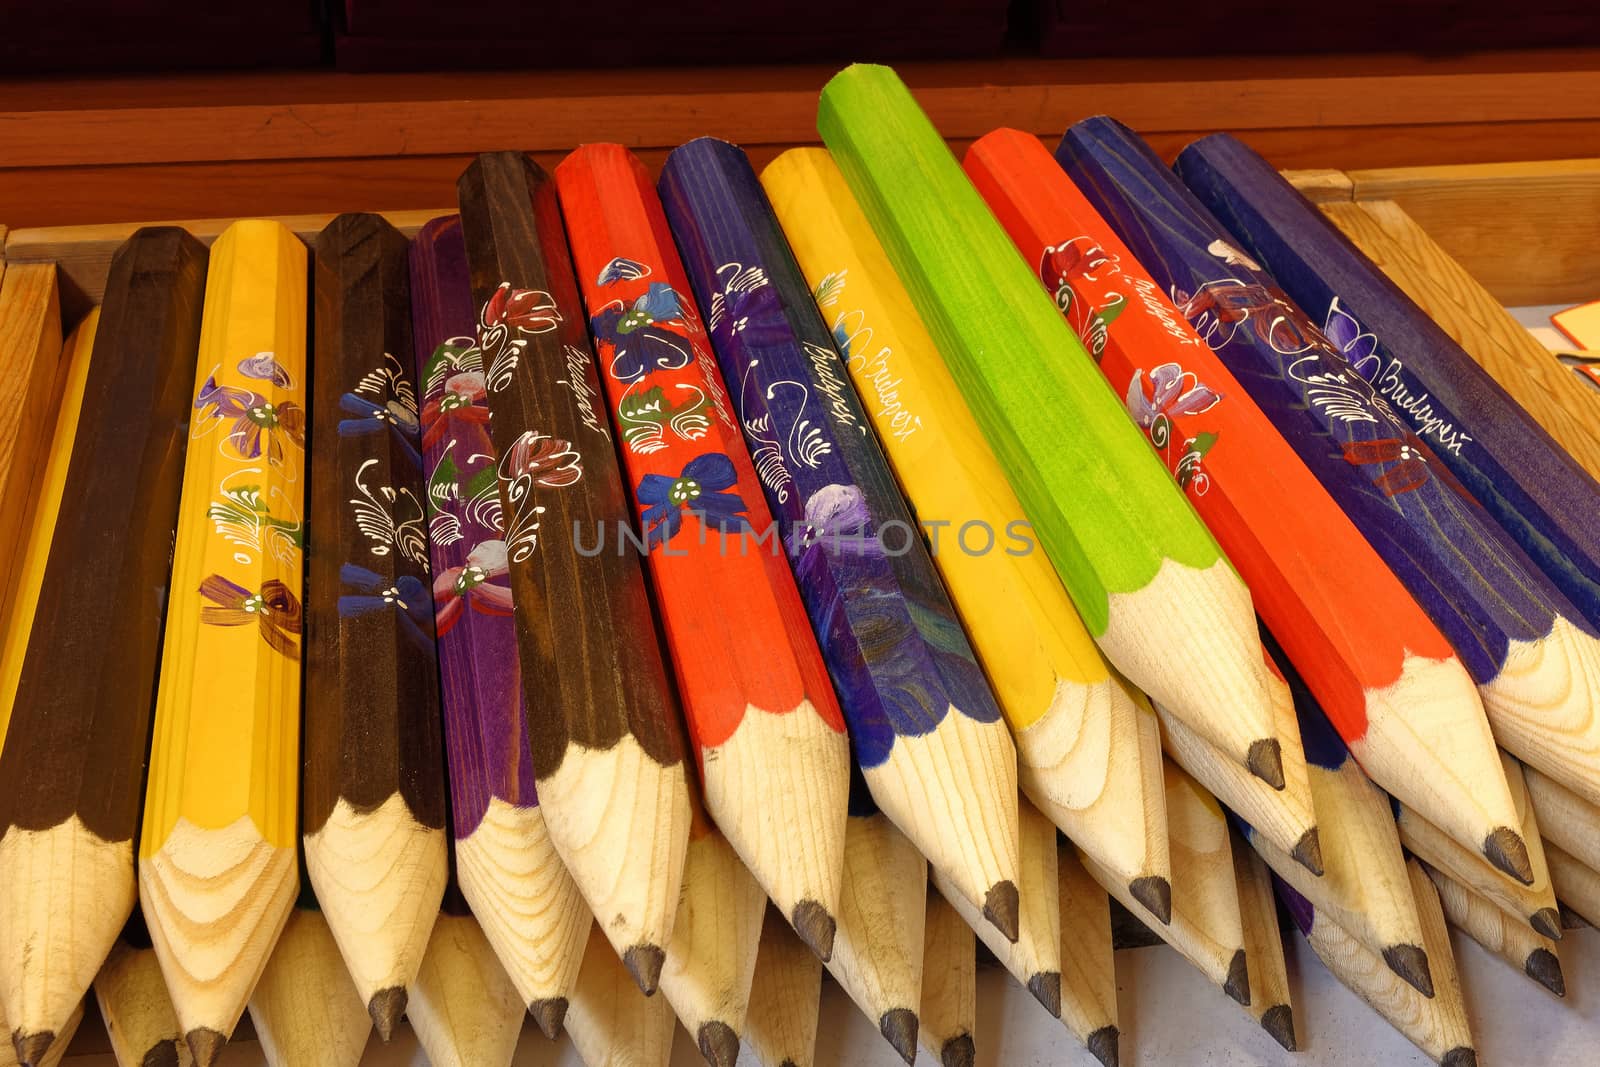 Group of colorful wooden pencils, close-up photo of pencils